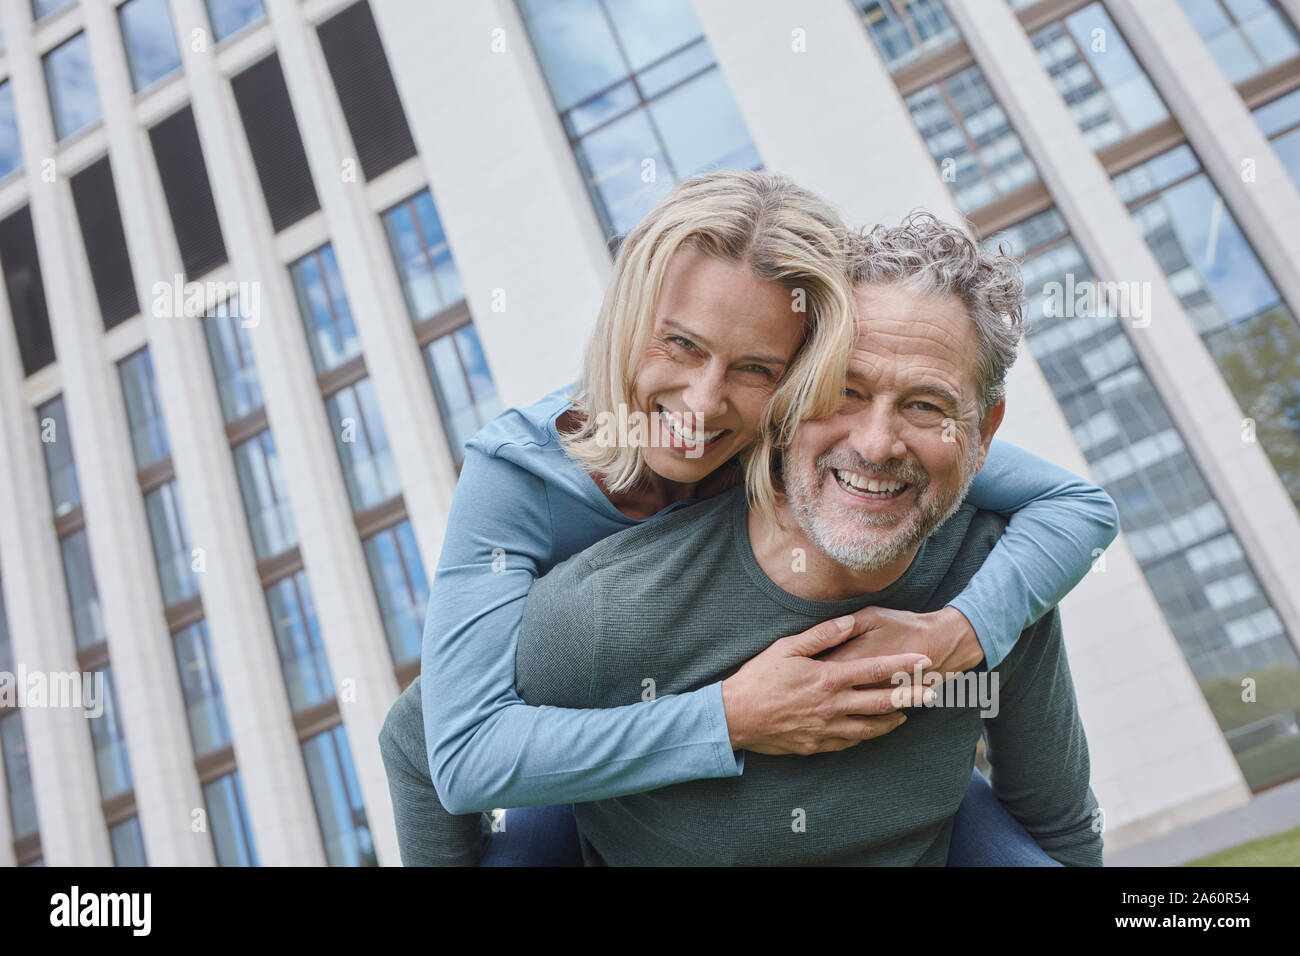 Happy mature man carrying woman piggyback in the city Stock Photo